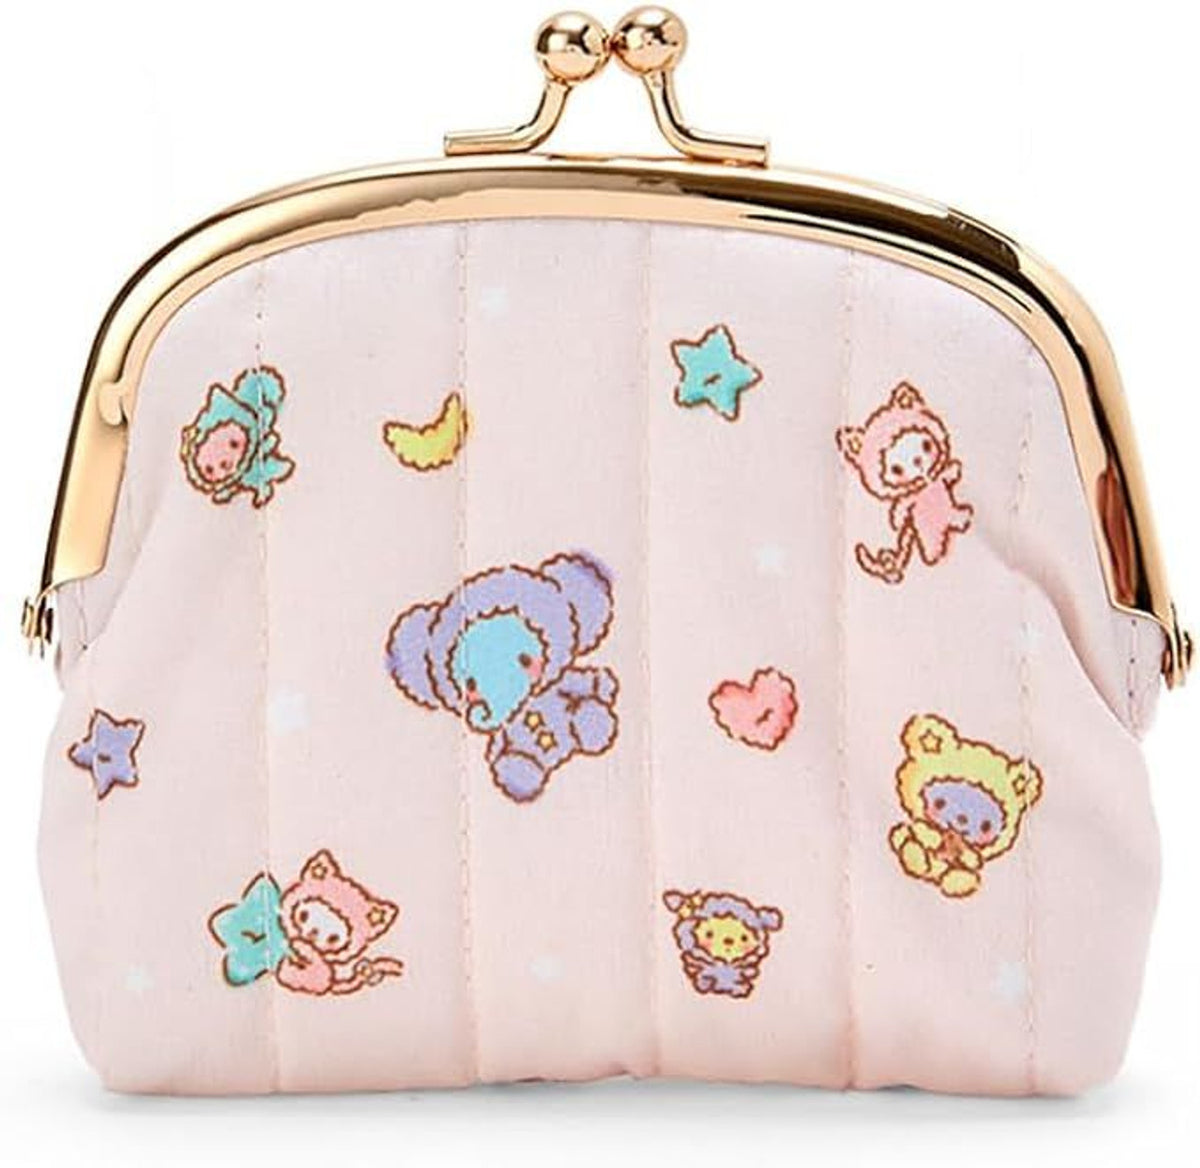 Little Twin Stars Peachy Coin Purse (Limited Japan Edition)